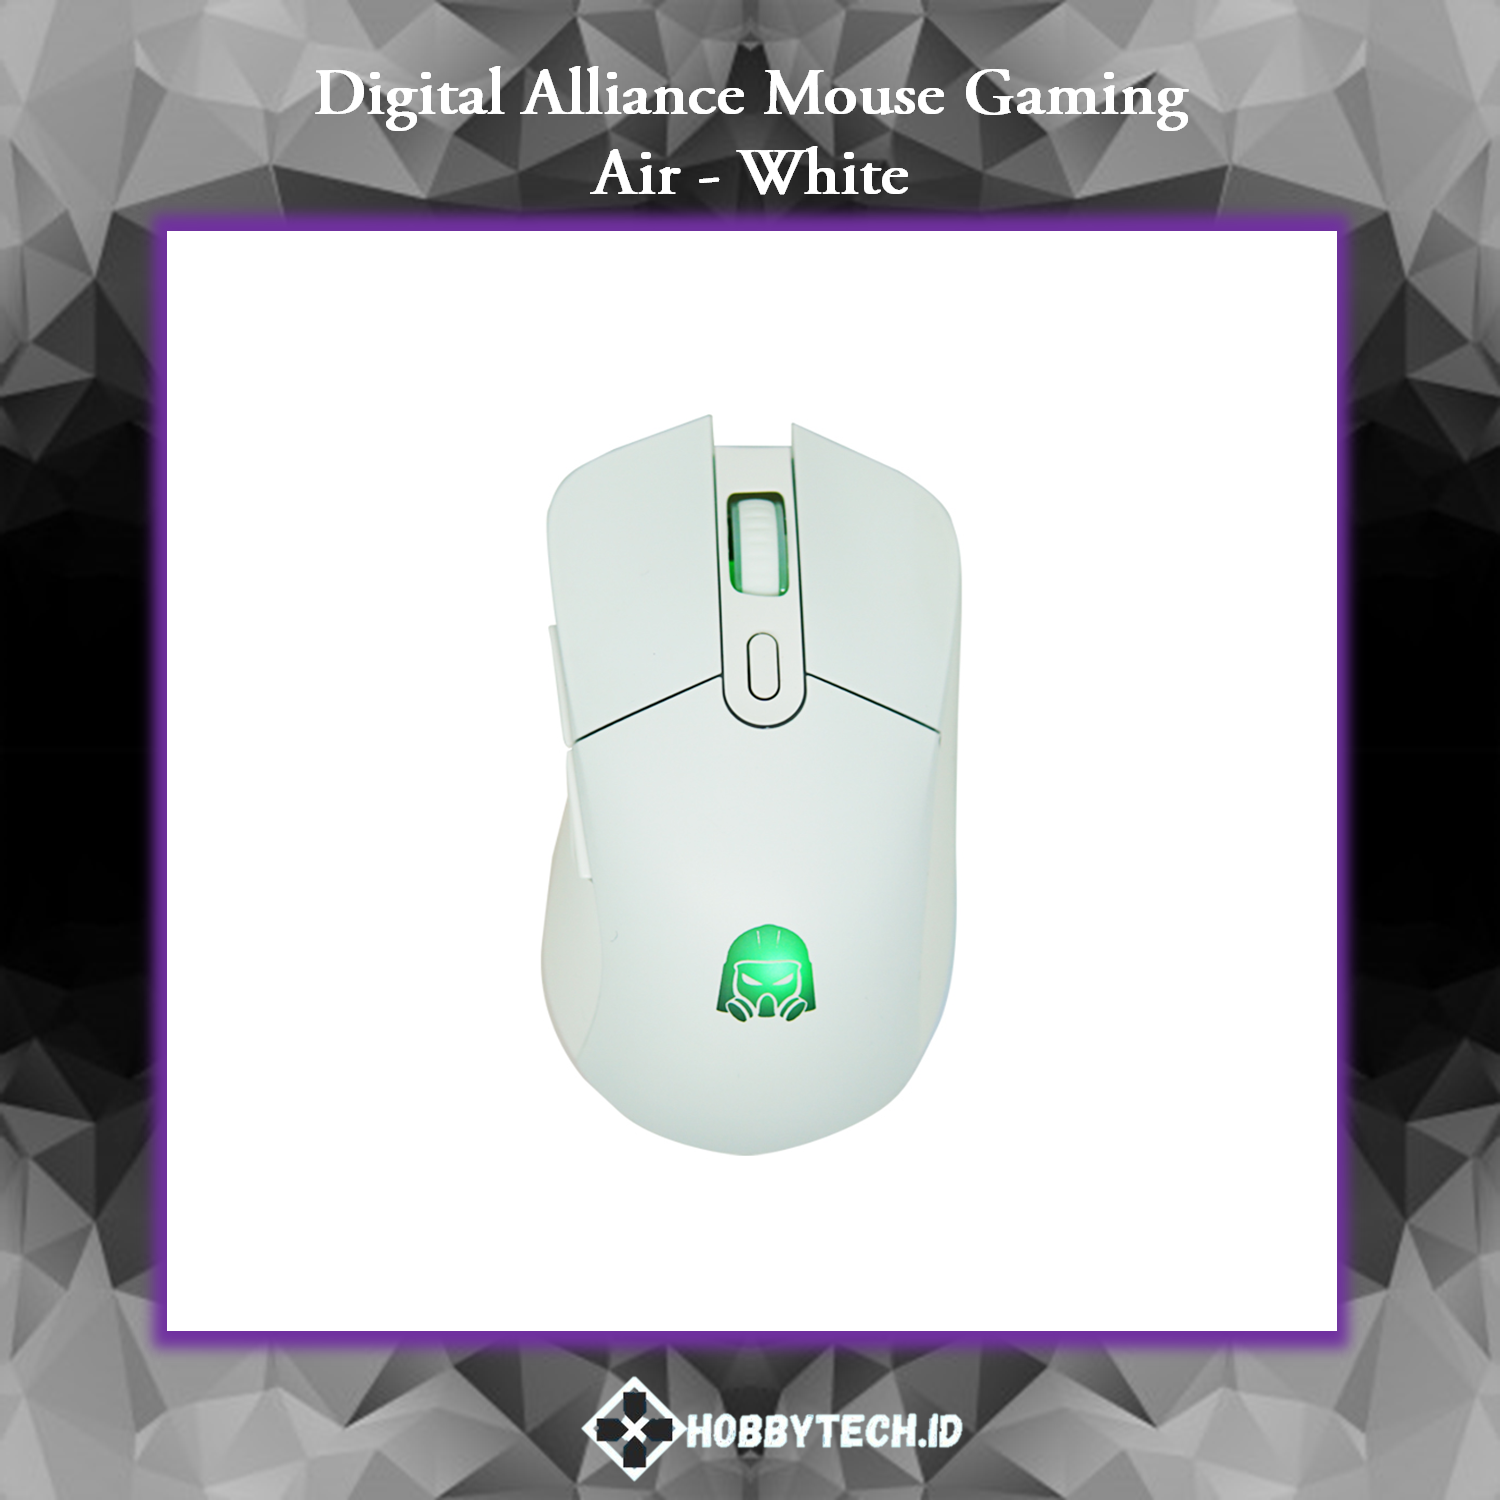 Digital Alliance Gaming Mouse Air White